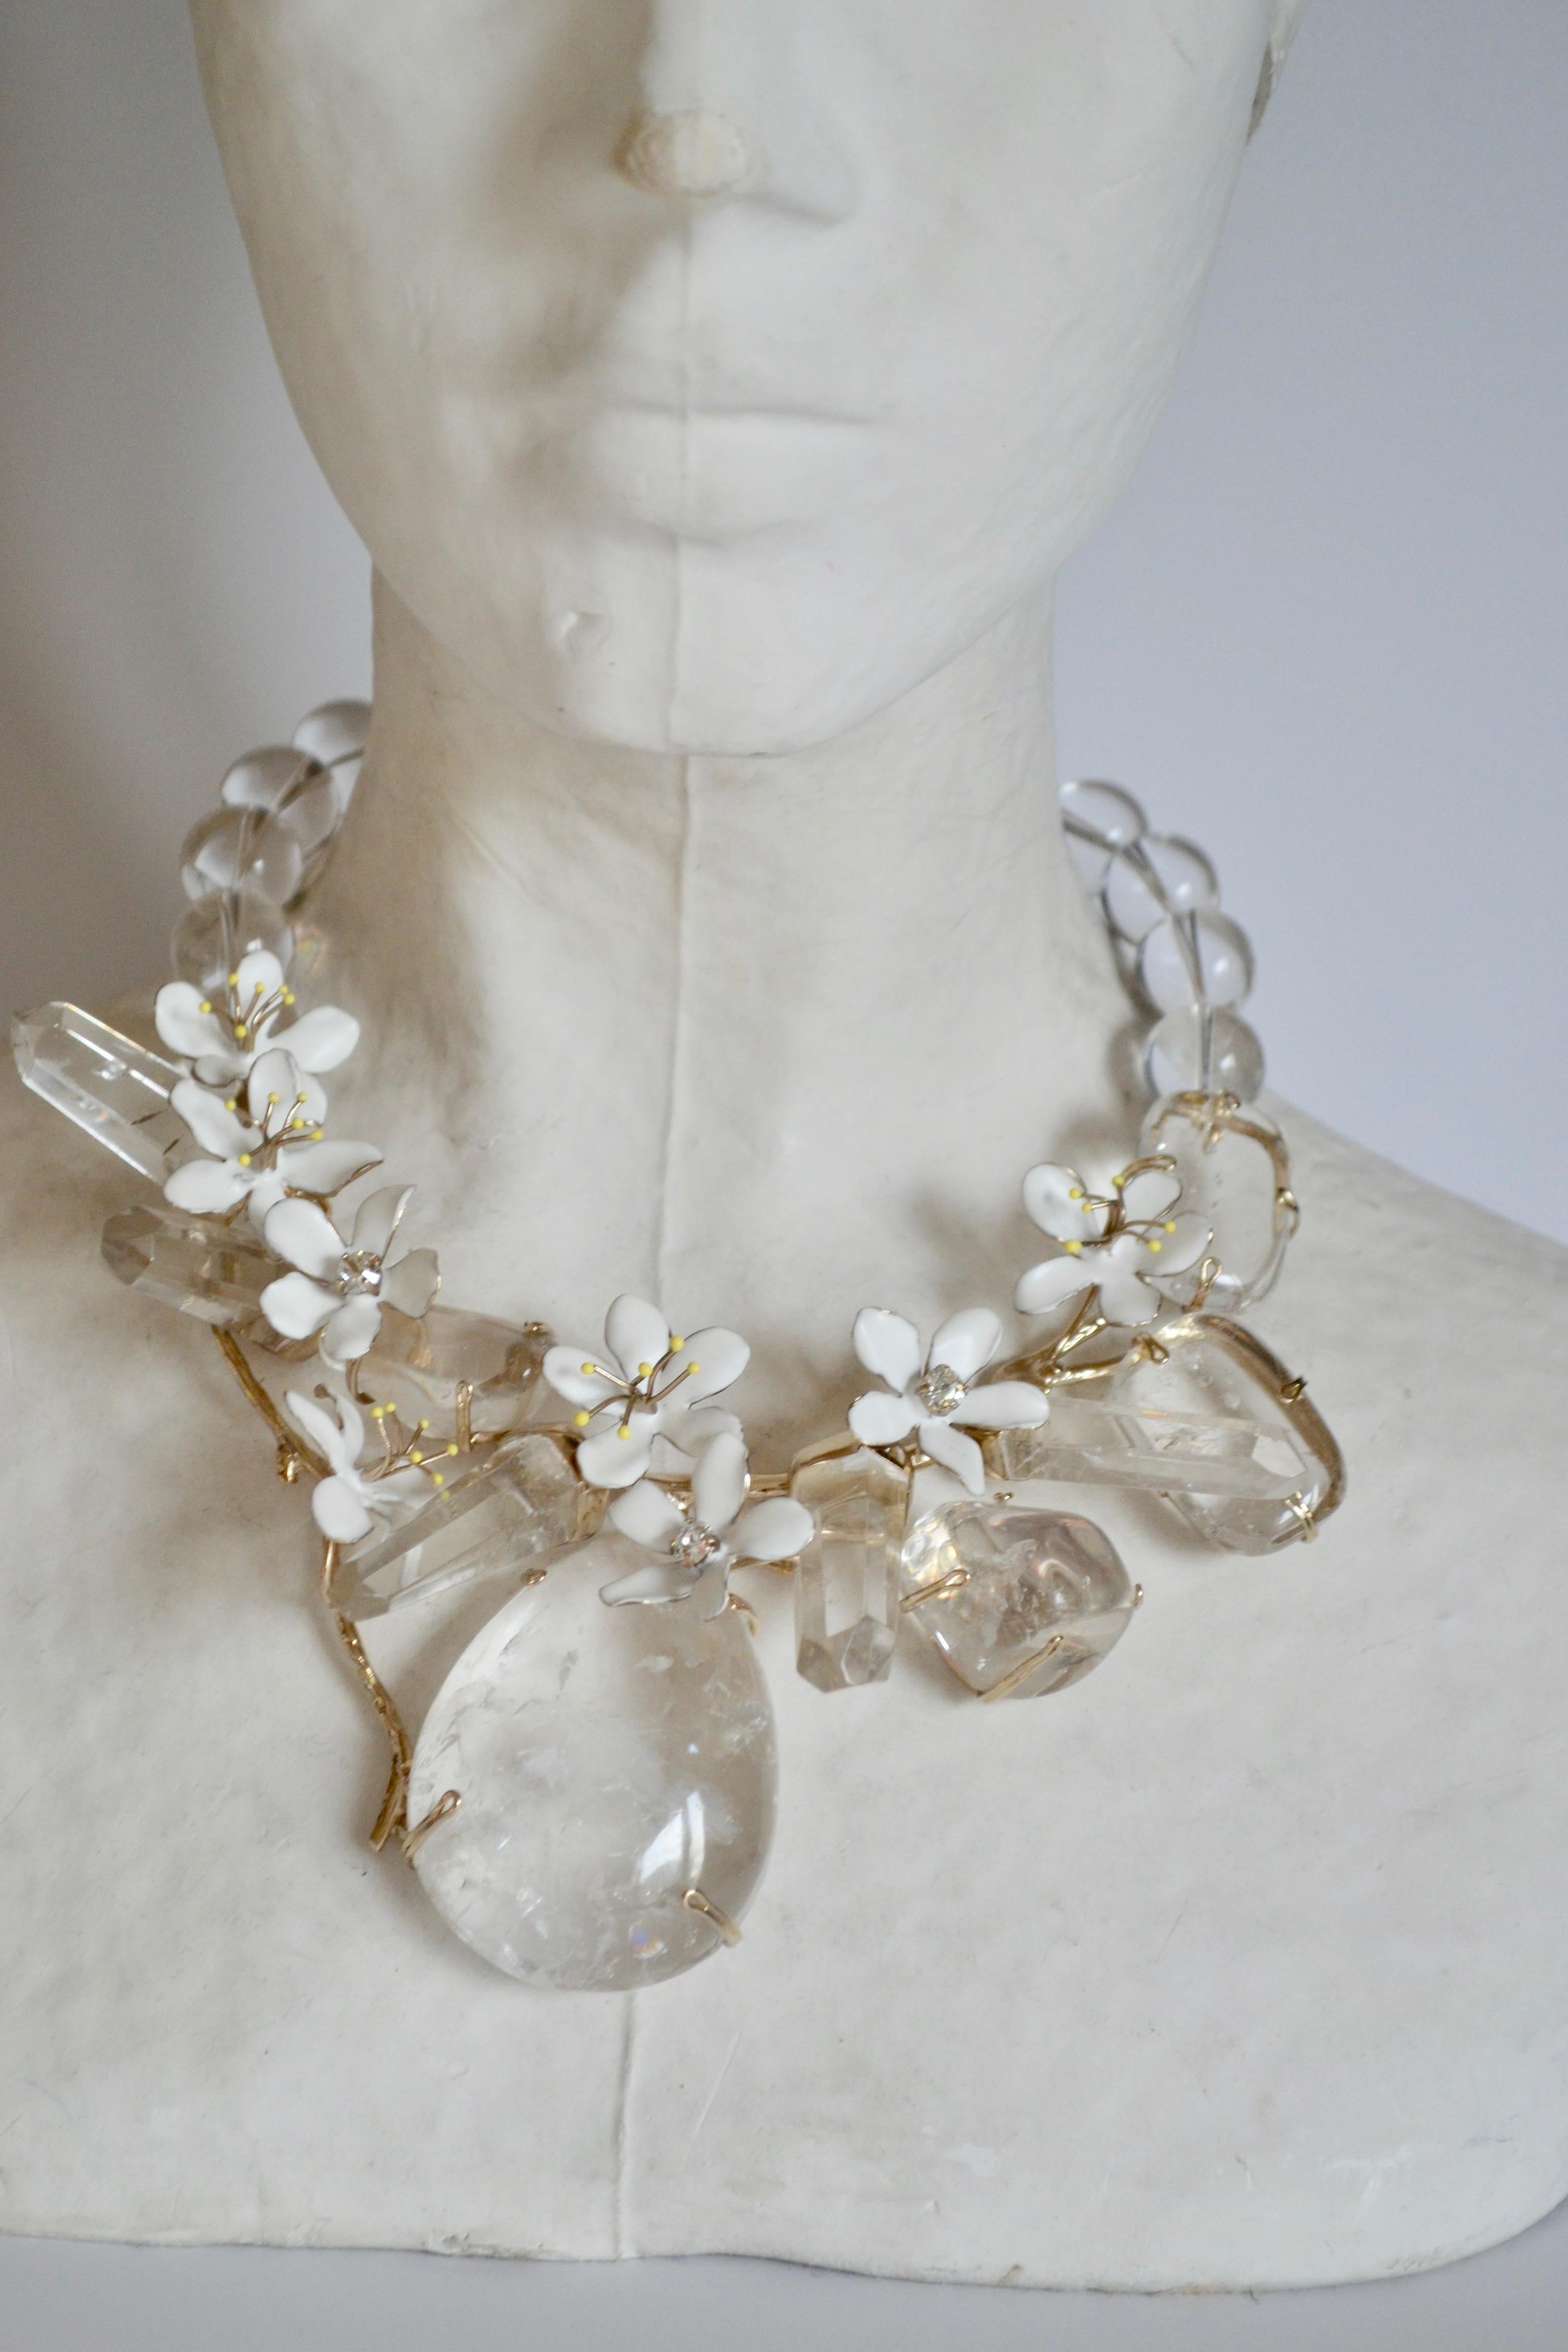 Rock crystal bead and enamel flower one of a kind necklace from Philippe Ferrandis. 